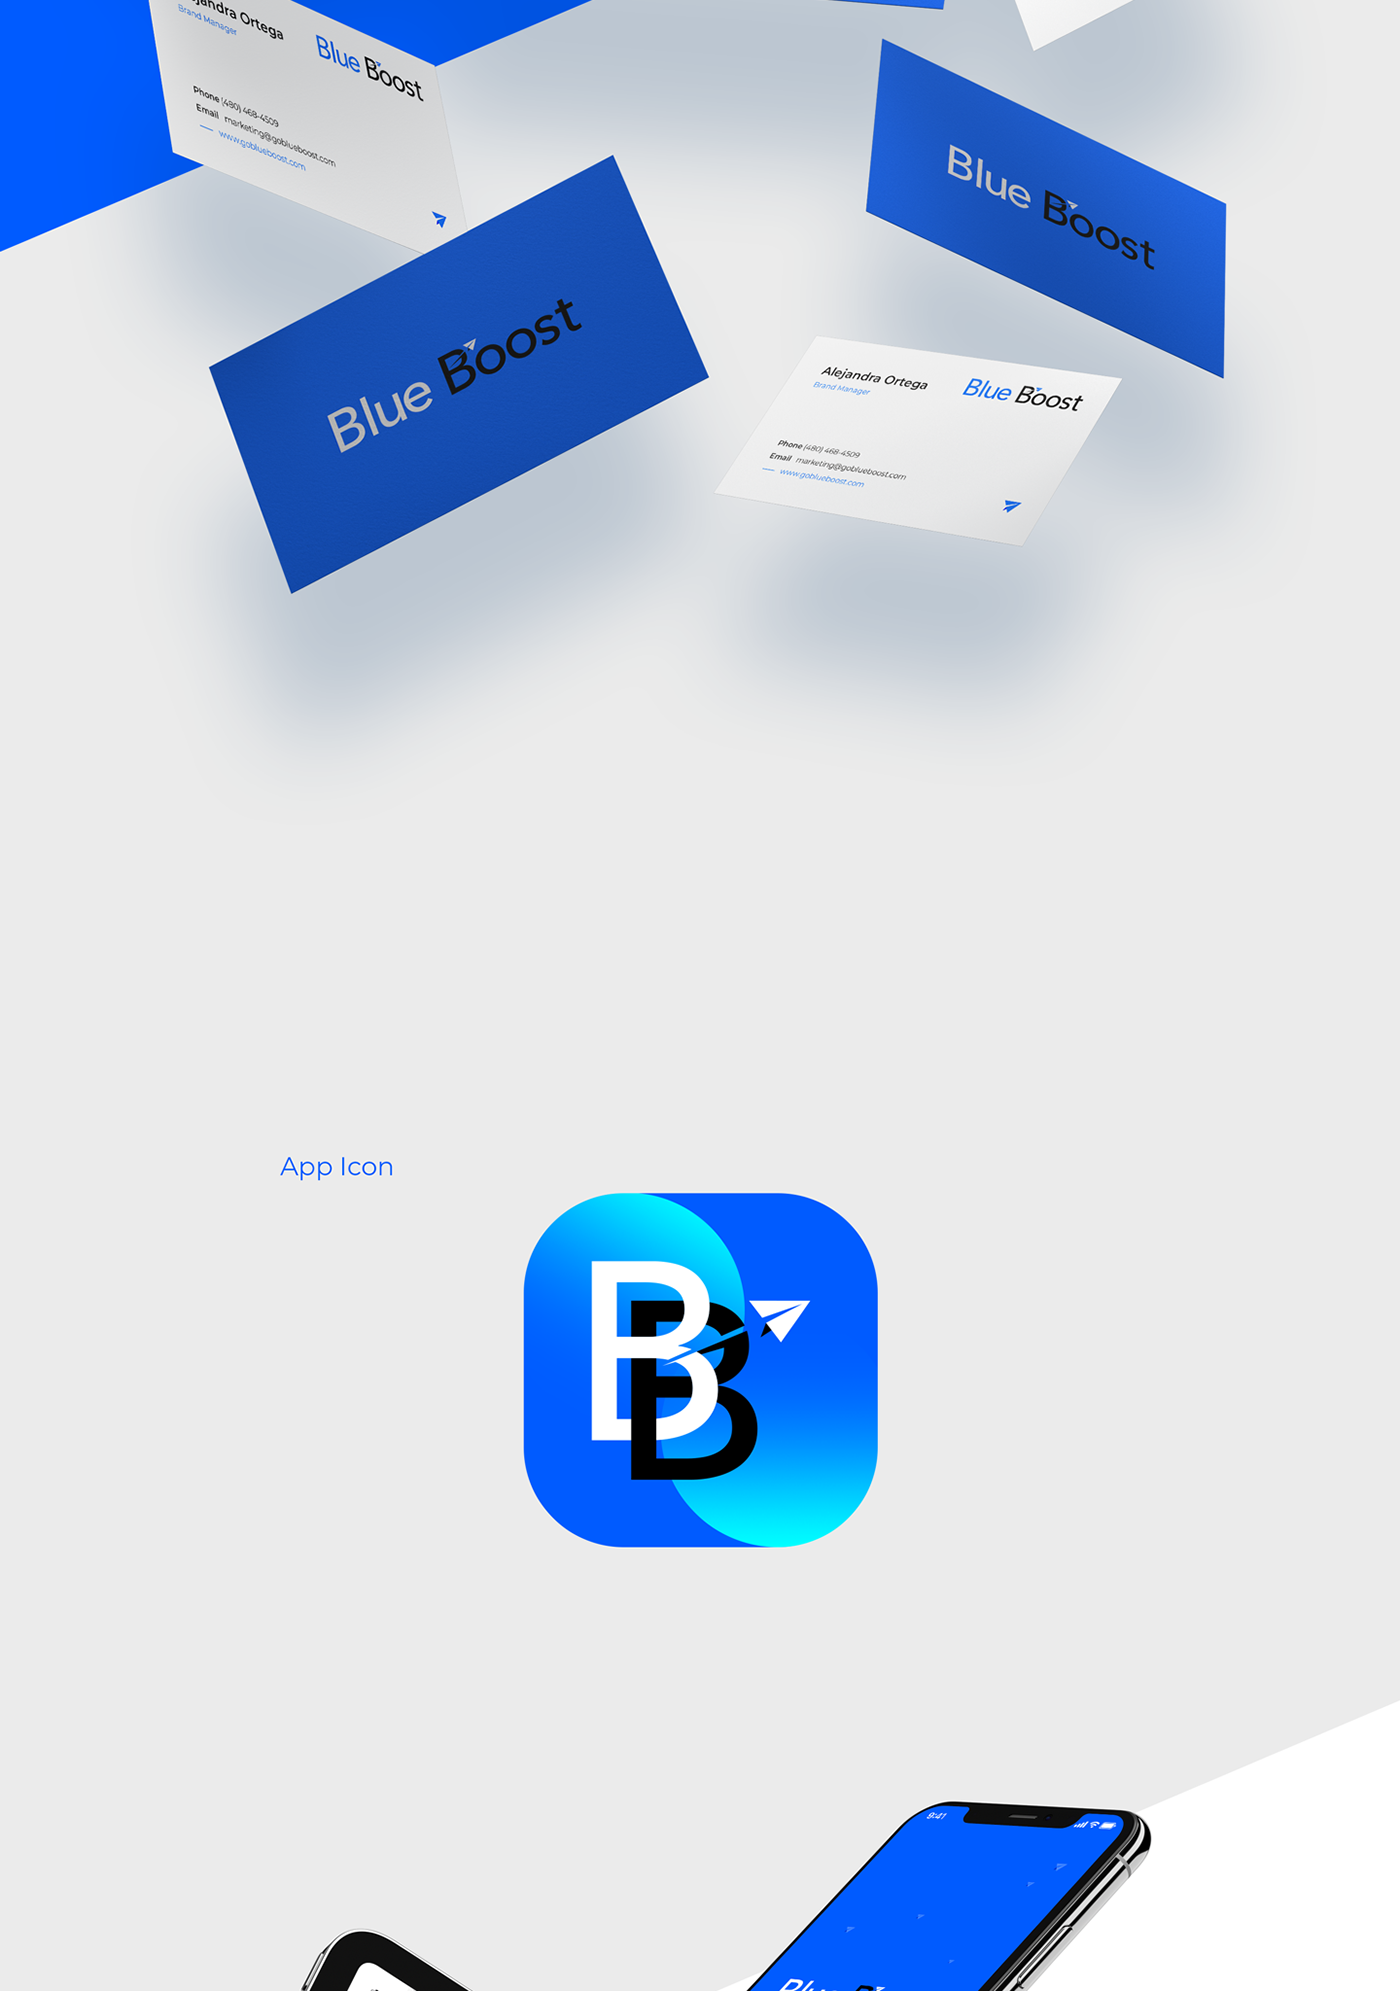 blue boost company marketing   Display app uiux Experience concept aesthetic